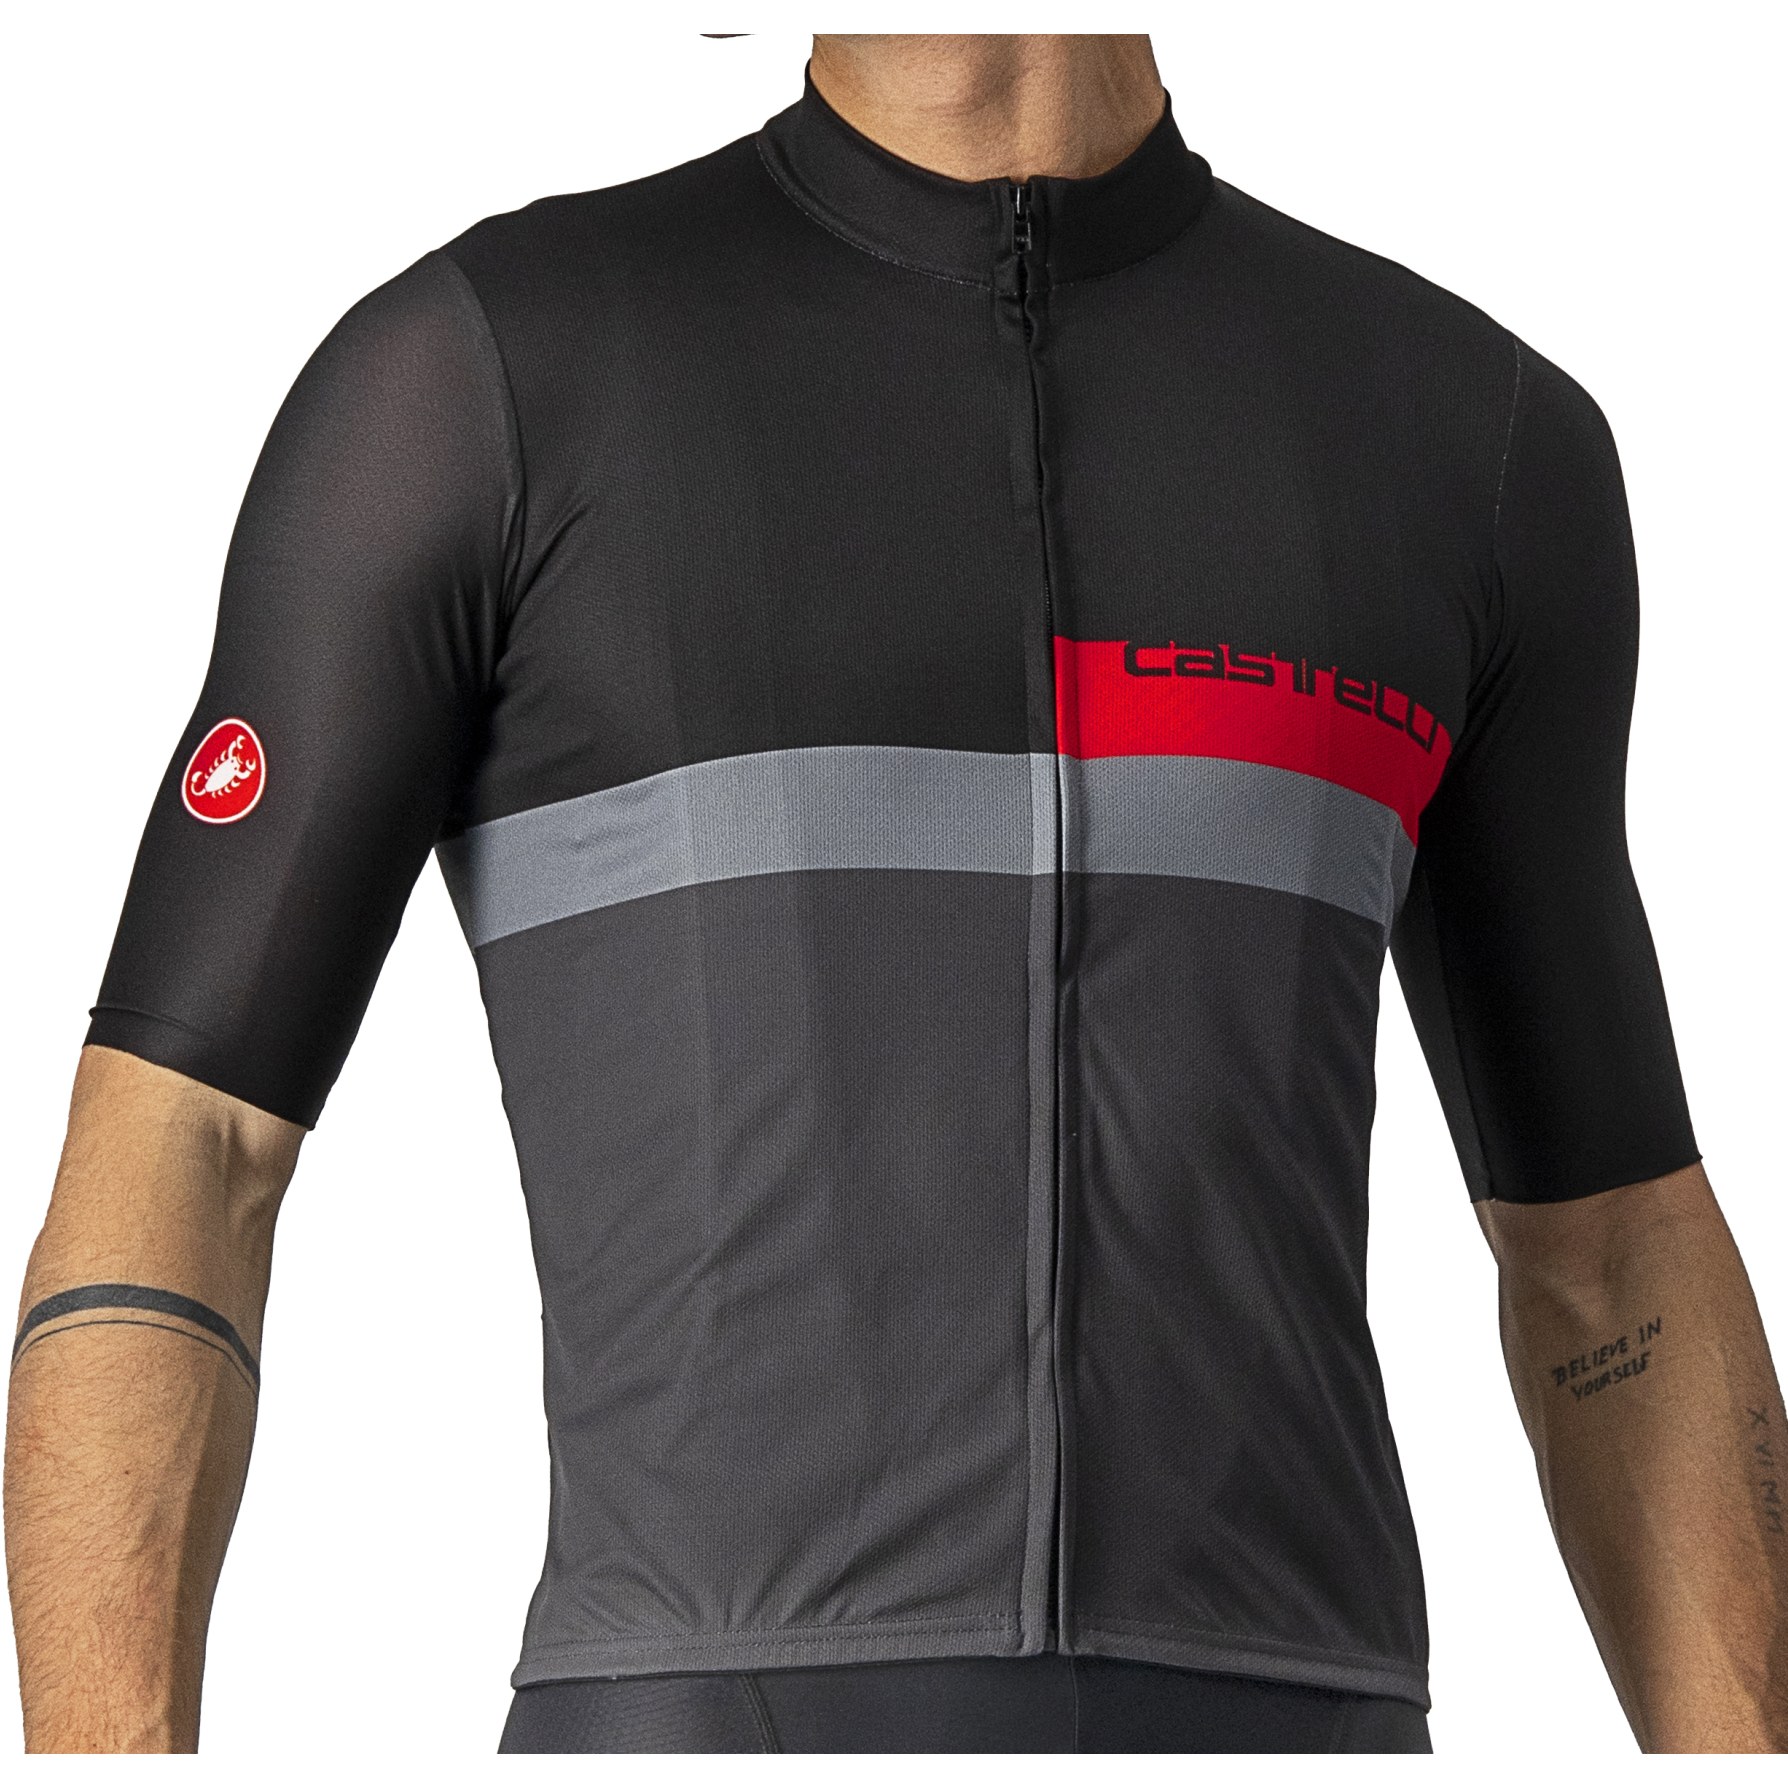 Image of Castelli A Blocco Jersey - light black/red-drark grey 085